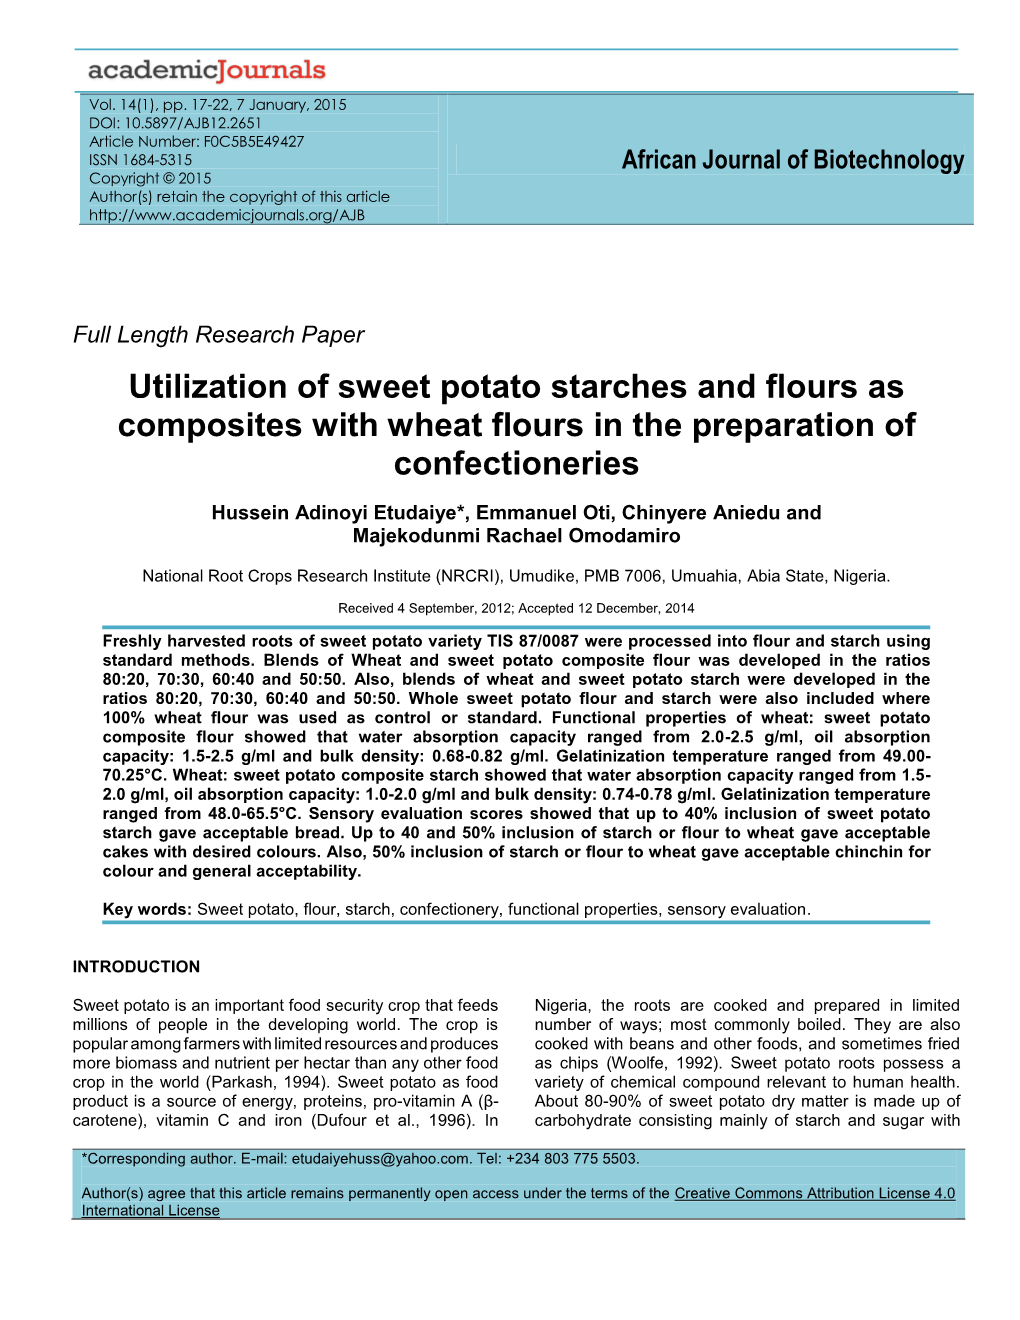 Utilization of Sweetpotato Starches and Flours As Composites with Wheat